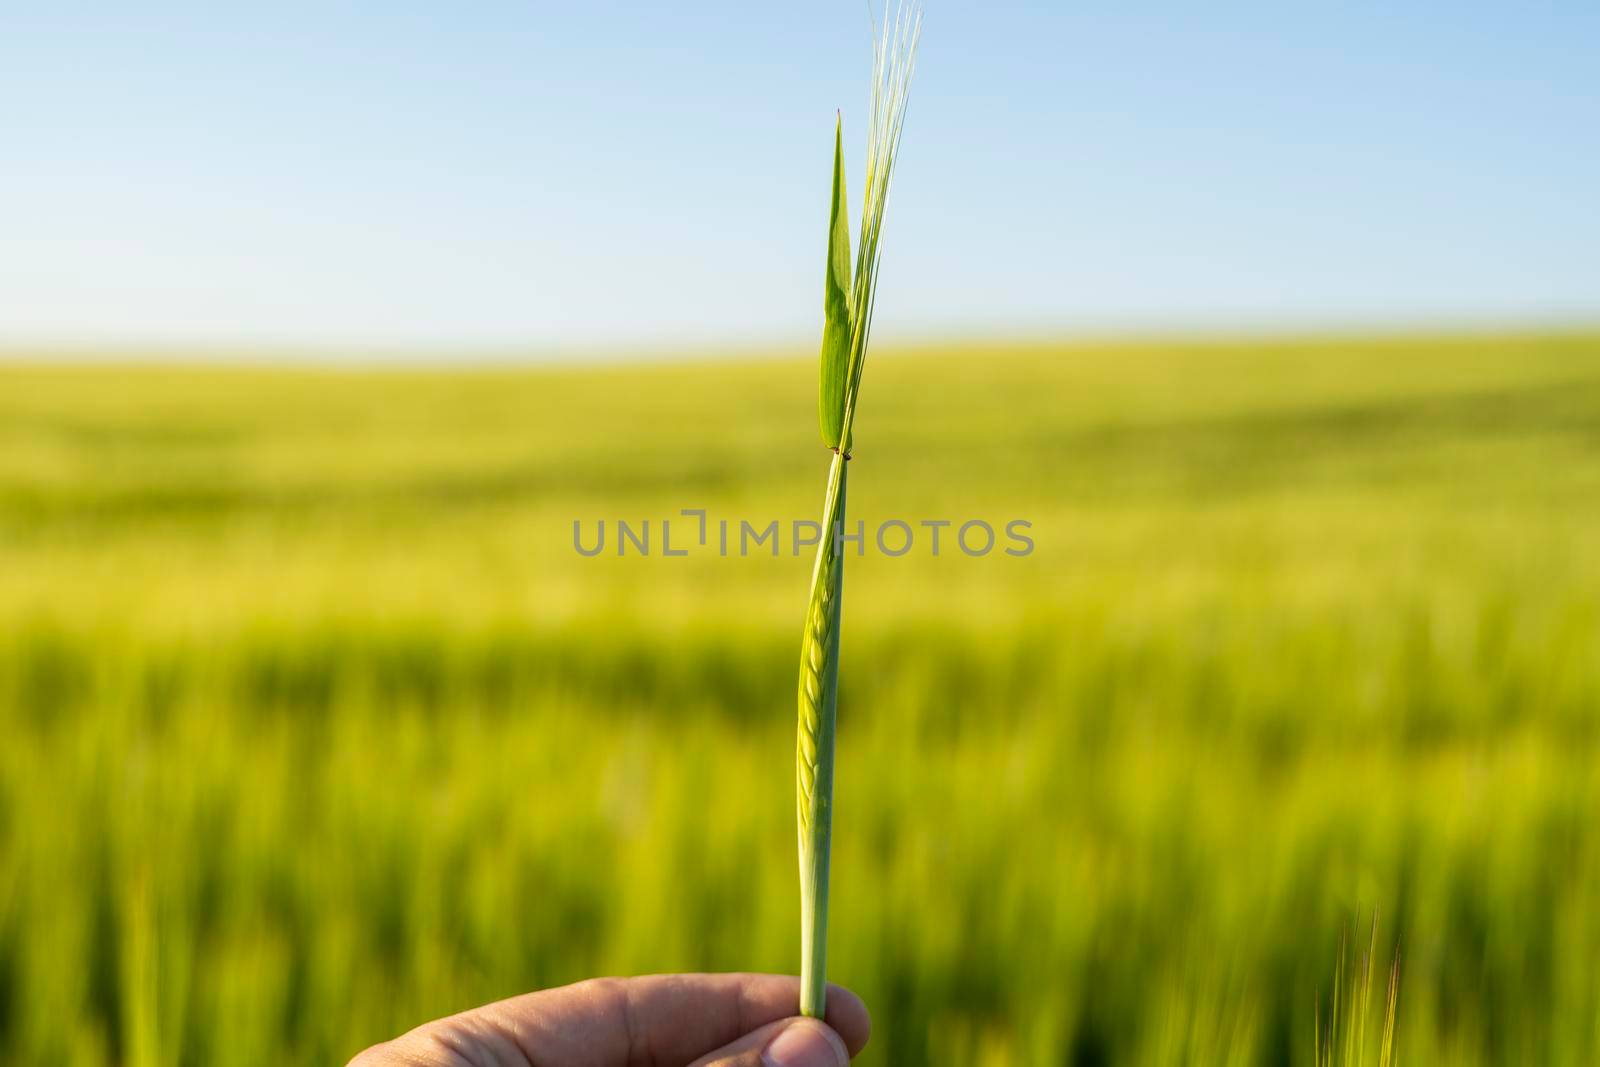 Farmer keeps a green barley spikelet in a hand against barley field in a daytime